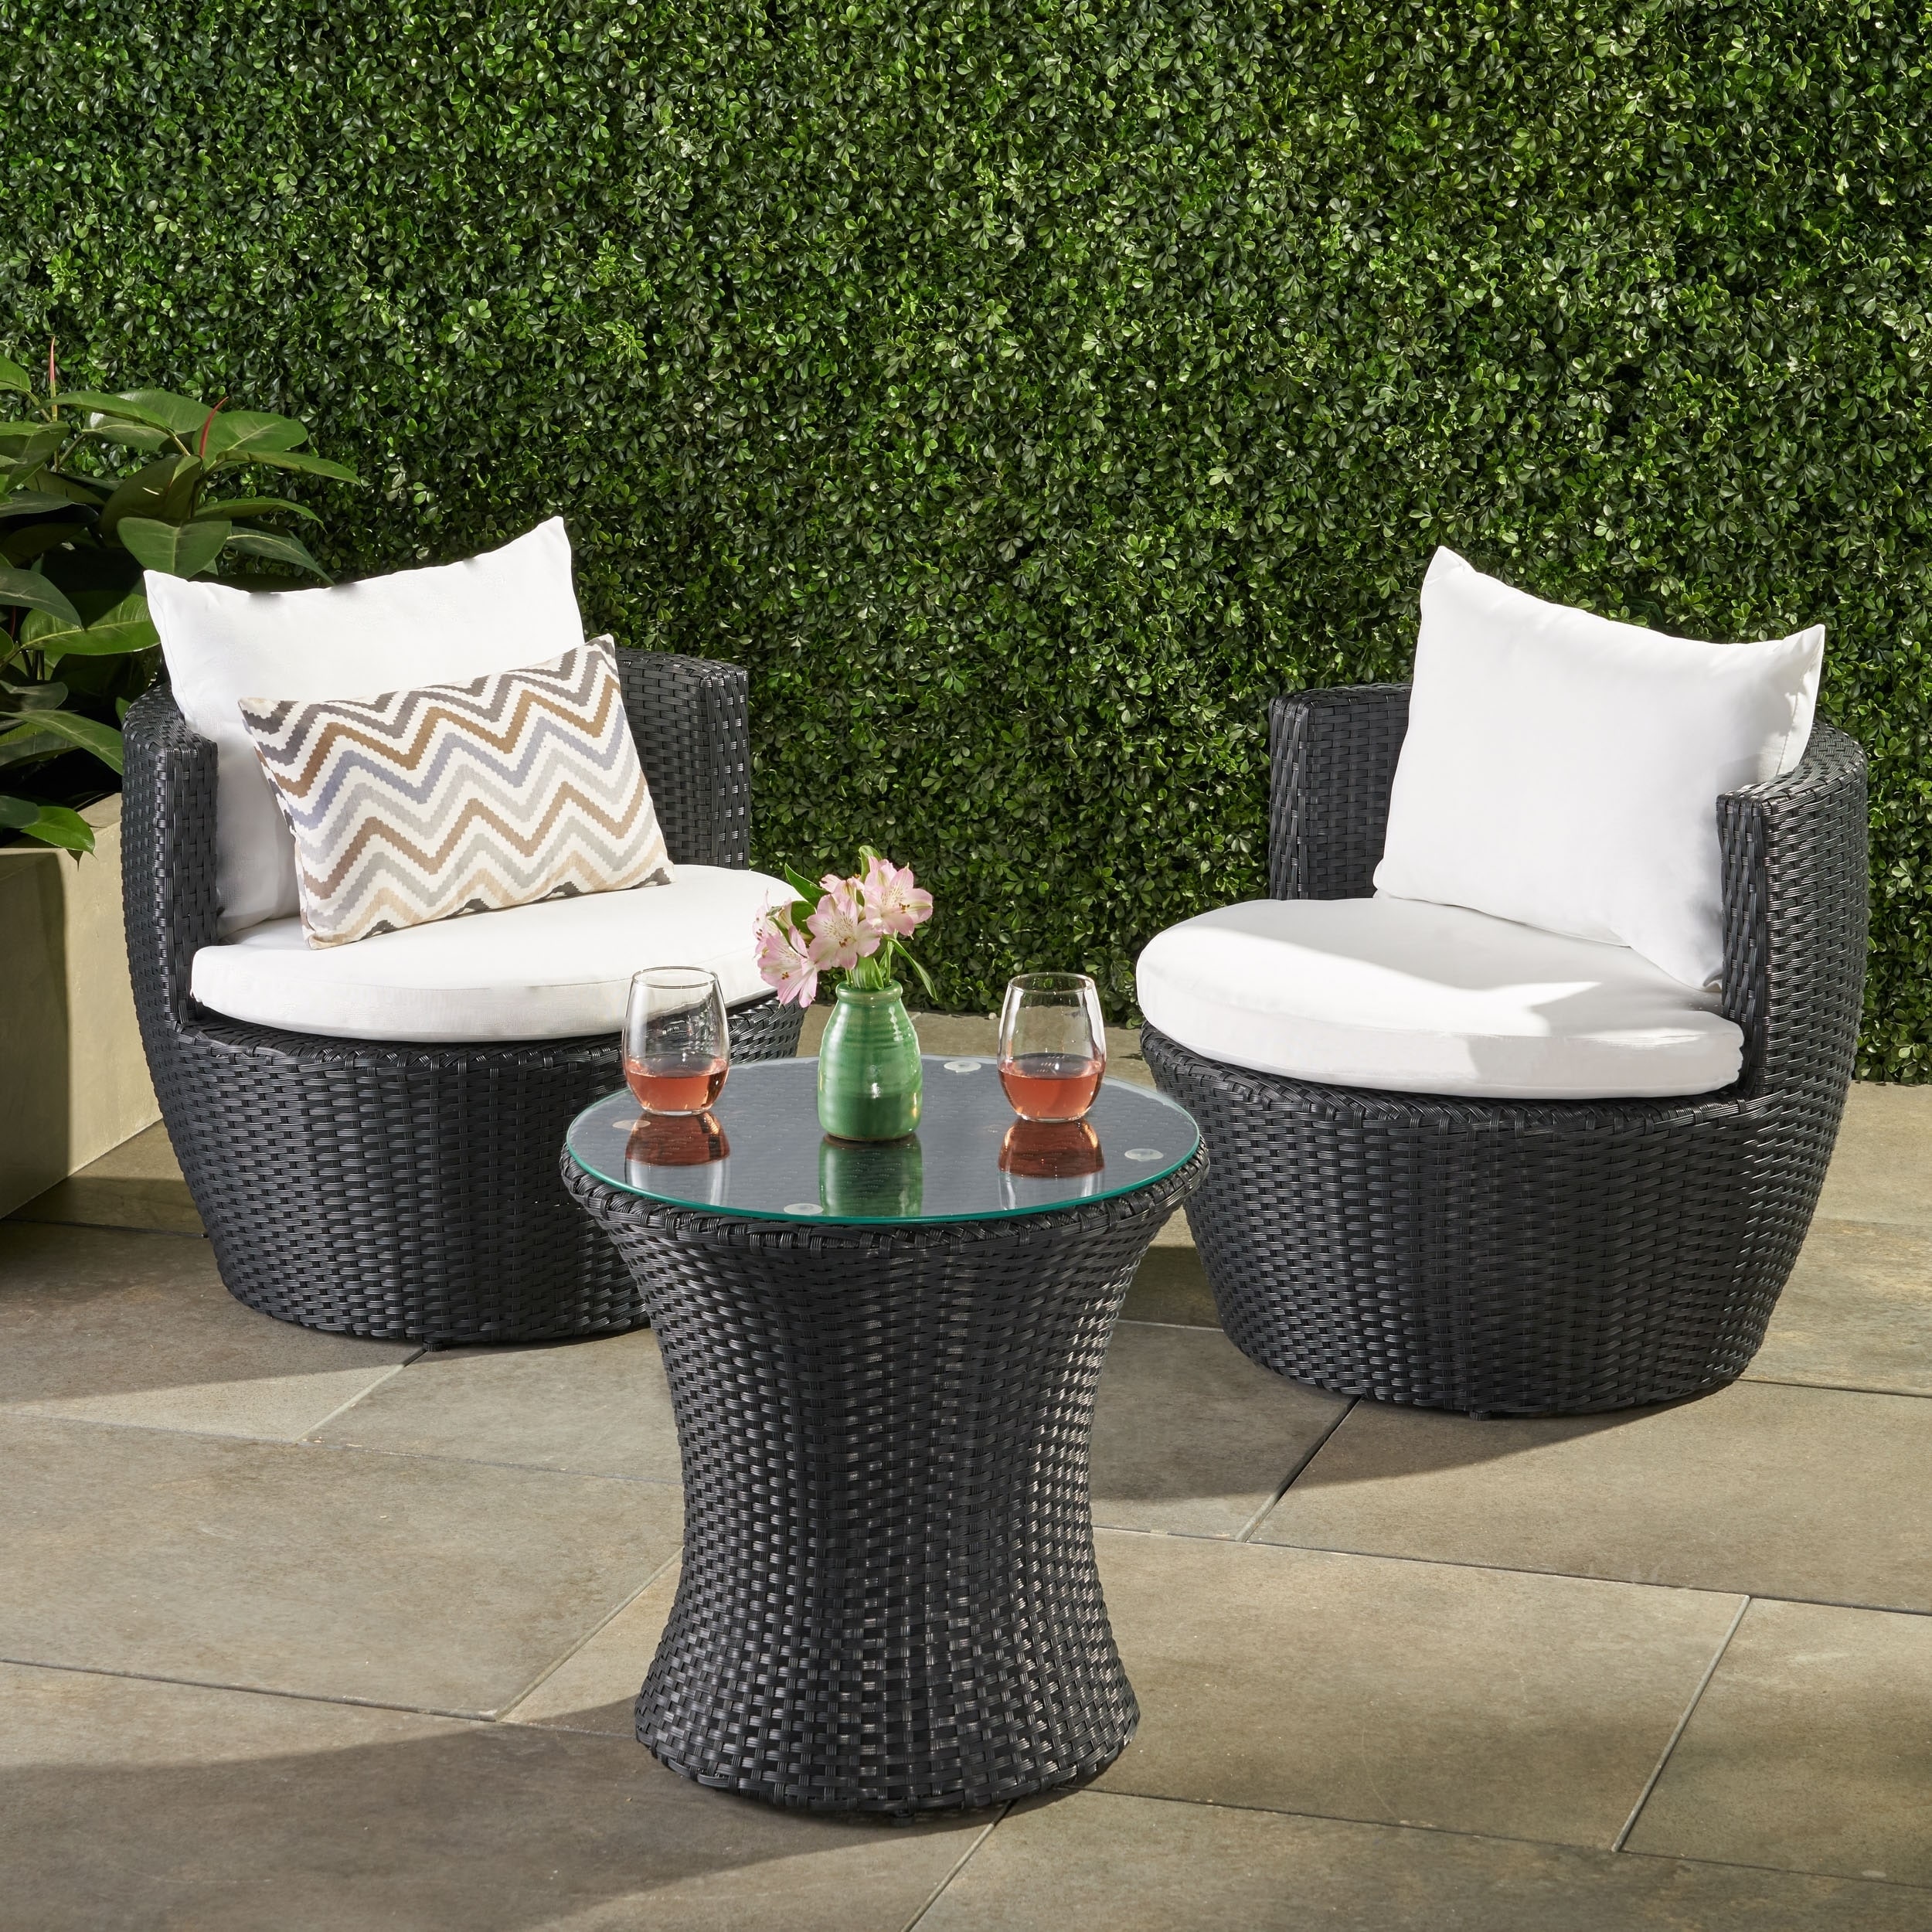 Christopher Knight Home Kono 3 piece Chat Set (Black with white cushionsNo assembly required, arrives ready to useSturdy constructionNeutral colors to match any outdoor decorIdeal for extra seating in your backyard areaChair Dimensions 23.62 inches high 